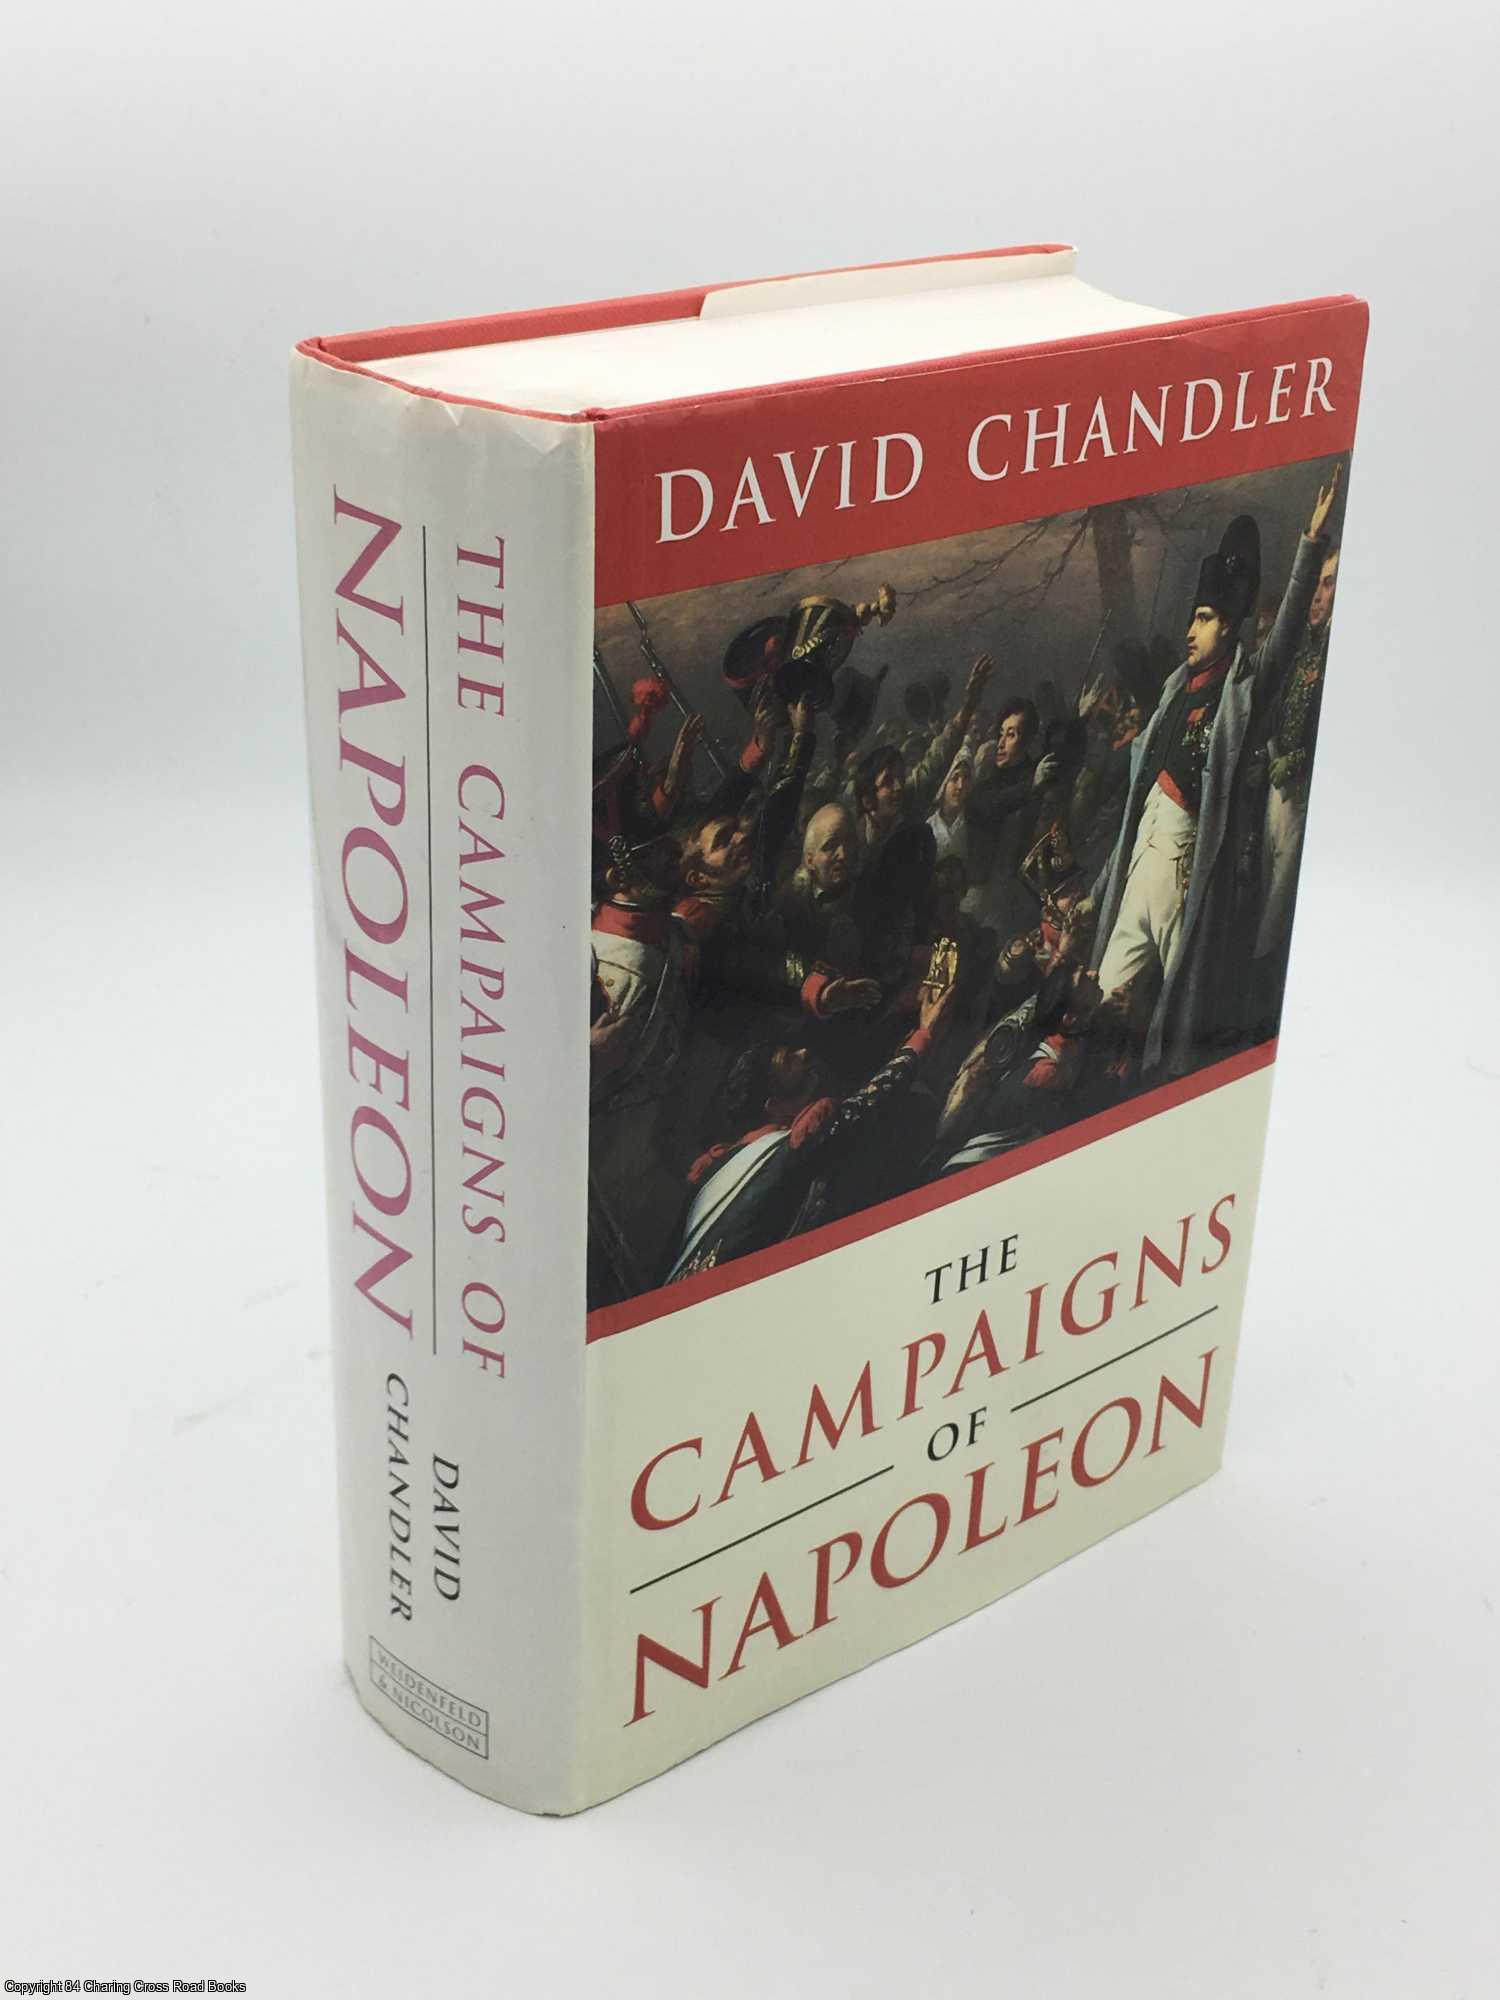 Chandler, David - The Campaigns of Napoleon